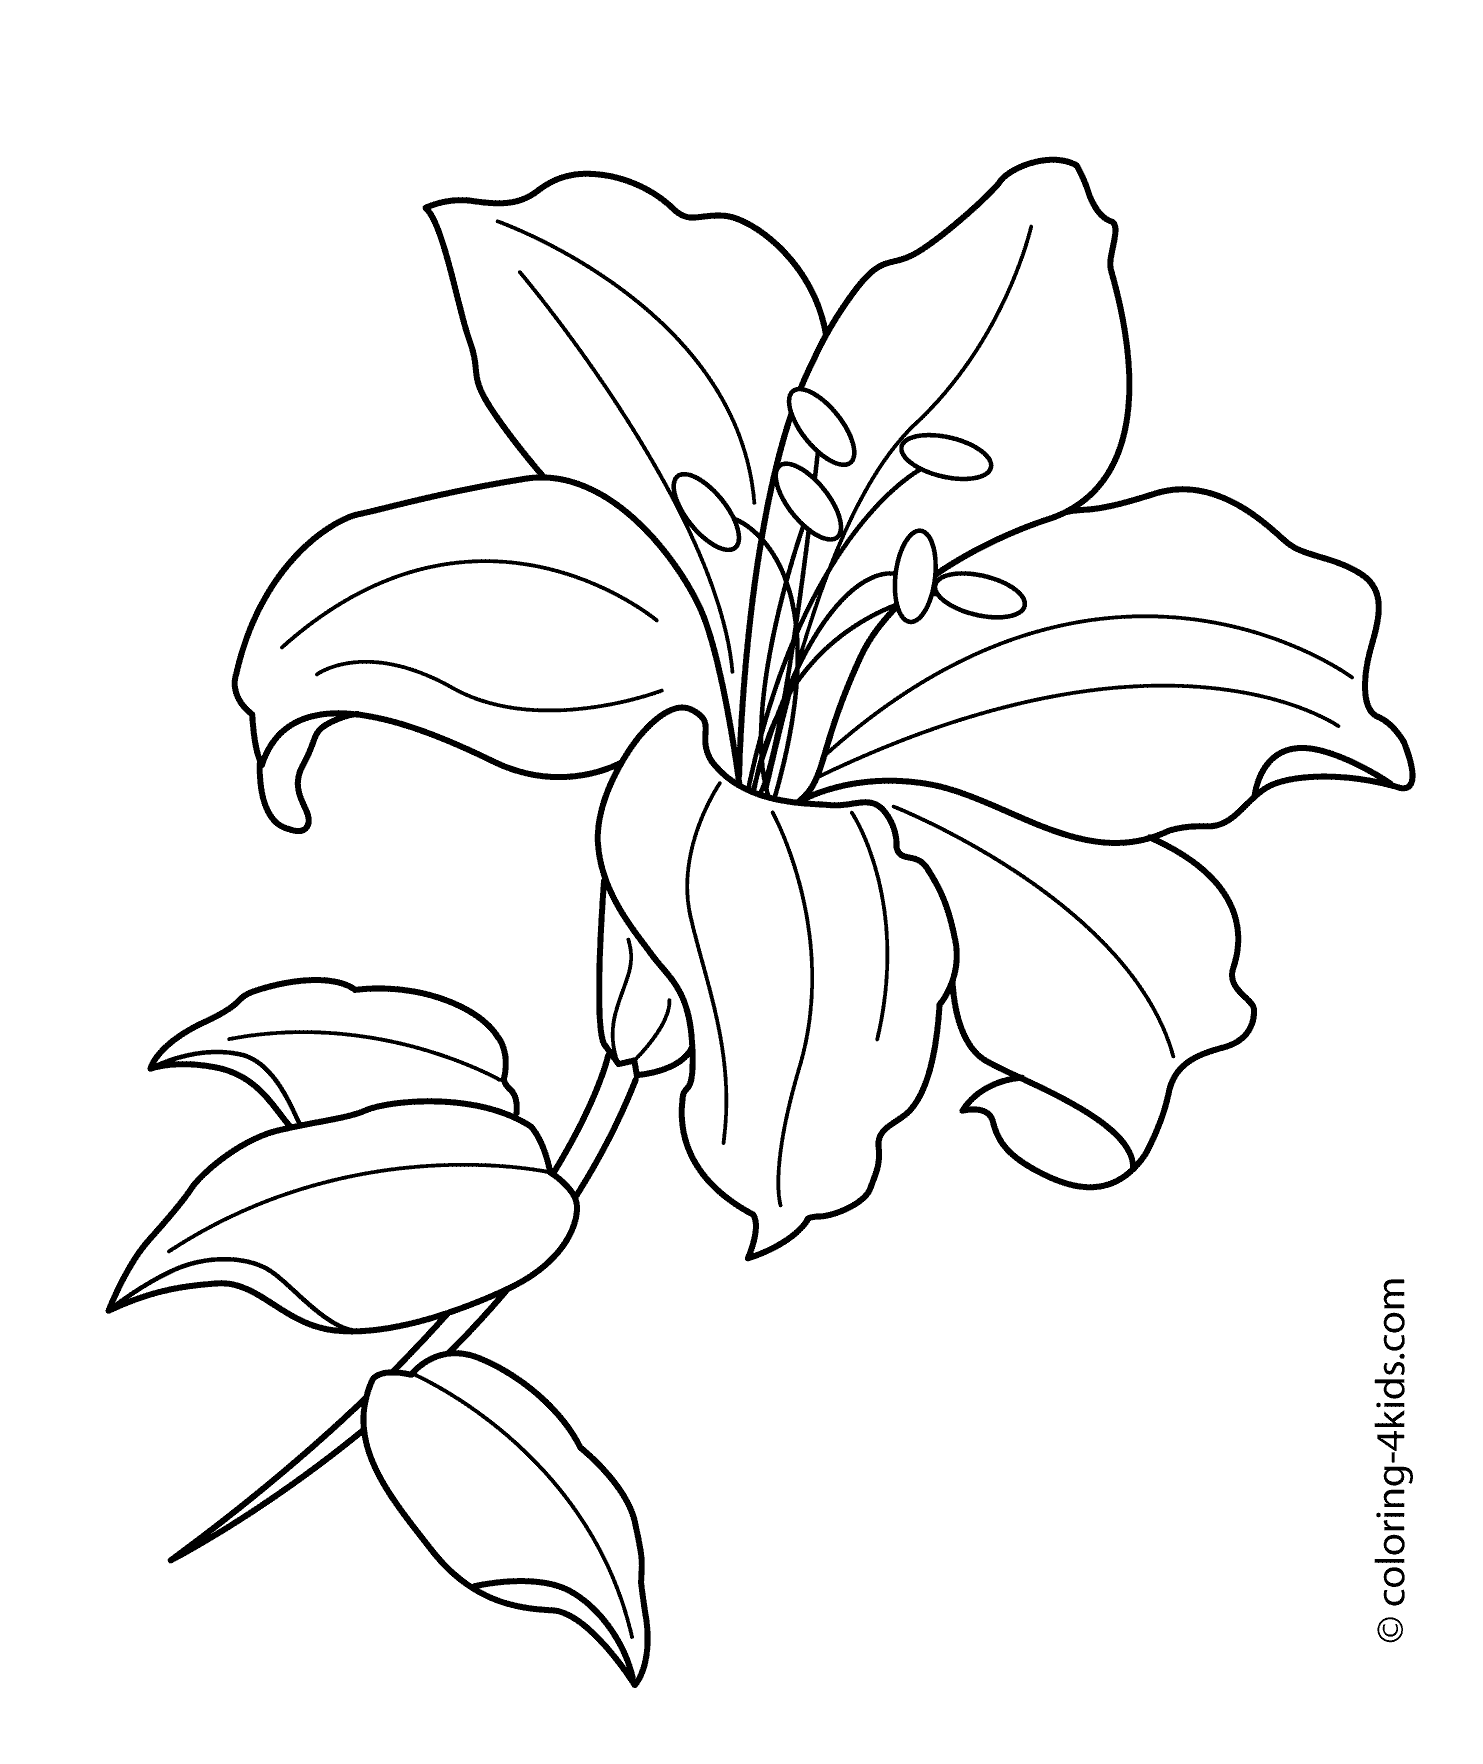 coloring flowers copic book lilies m 105 flower coloring pages flowers coloring pages coloring flowers book copic 